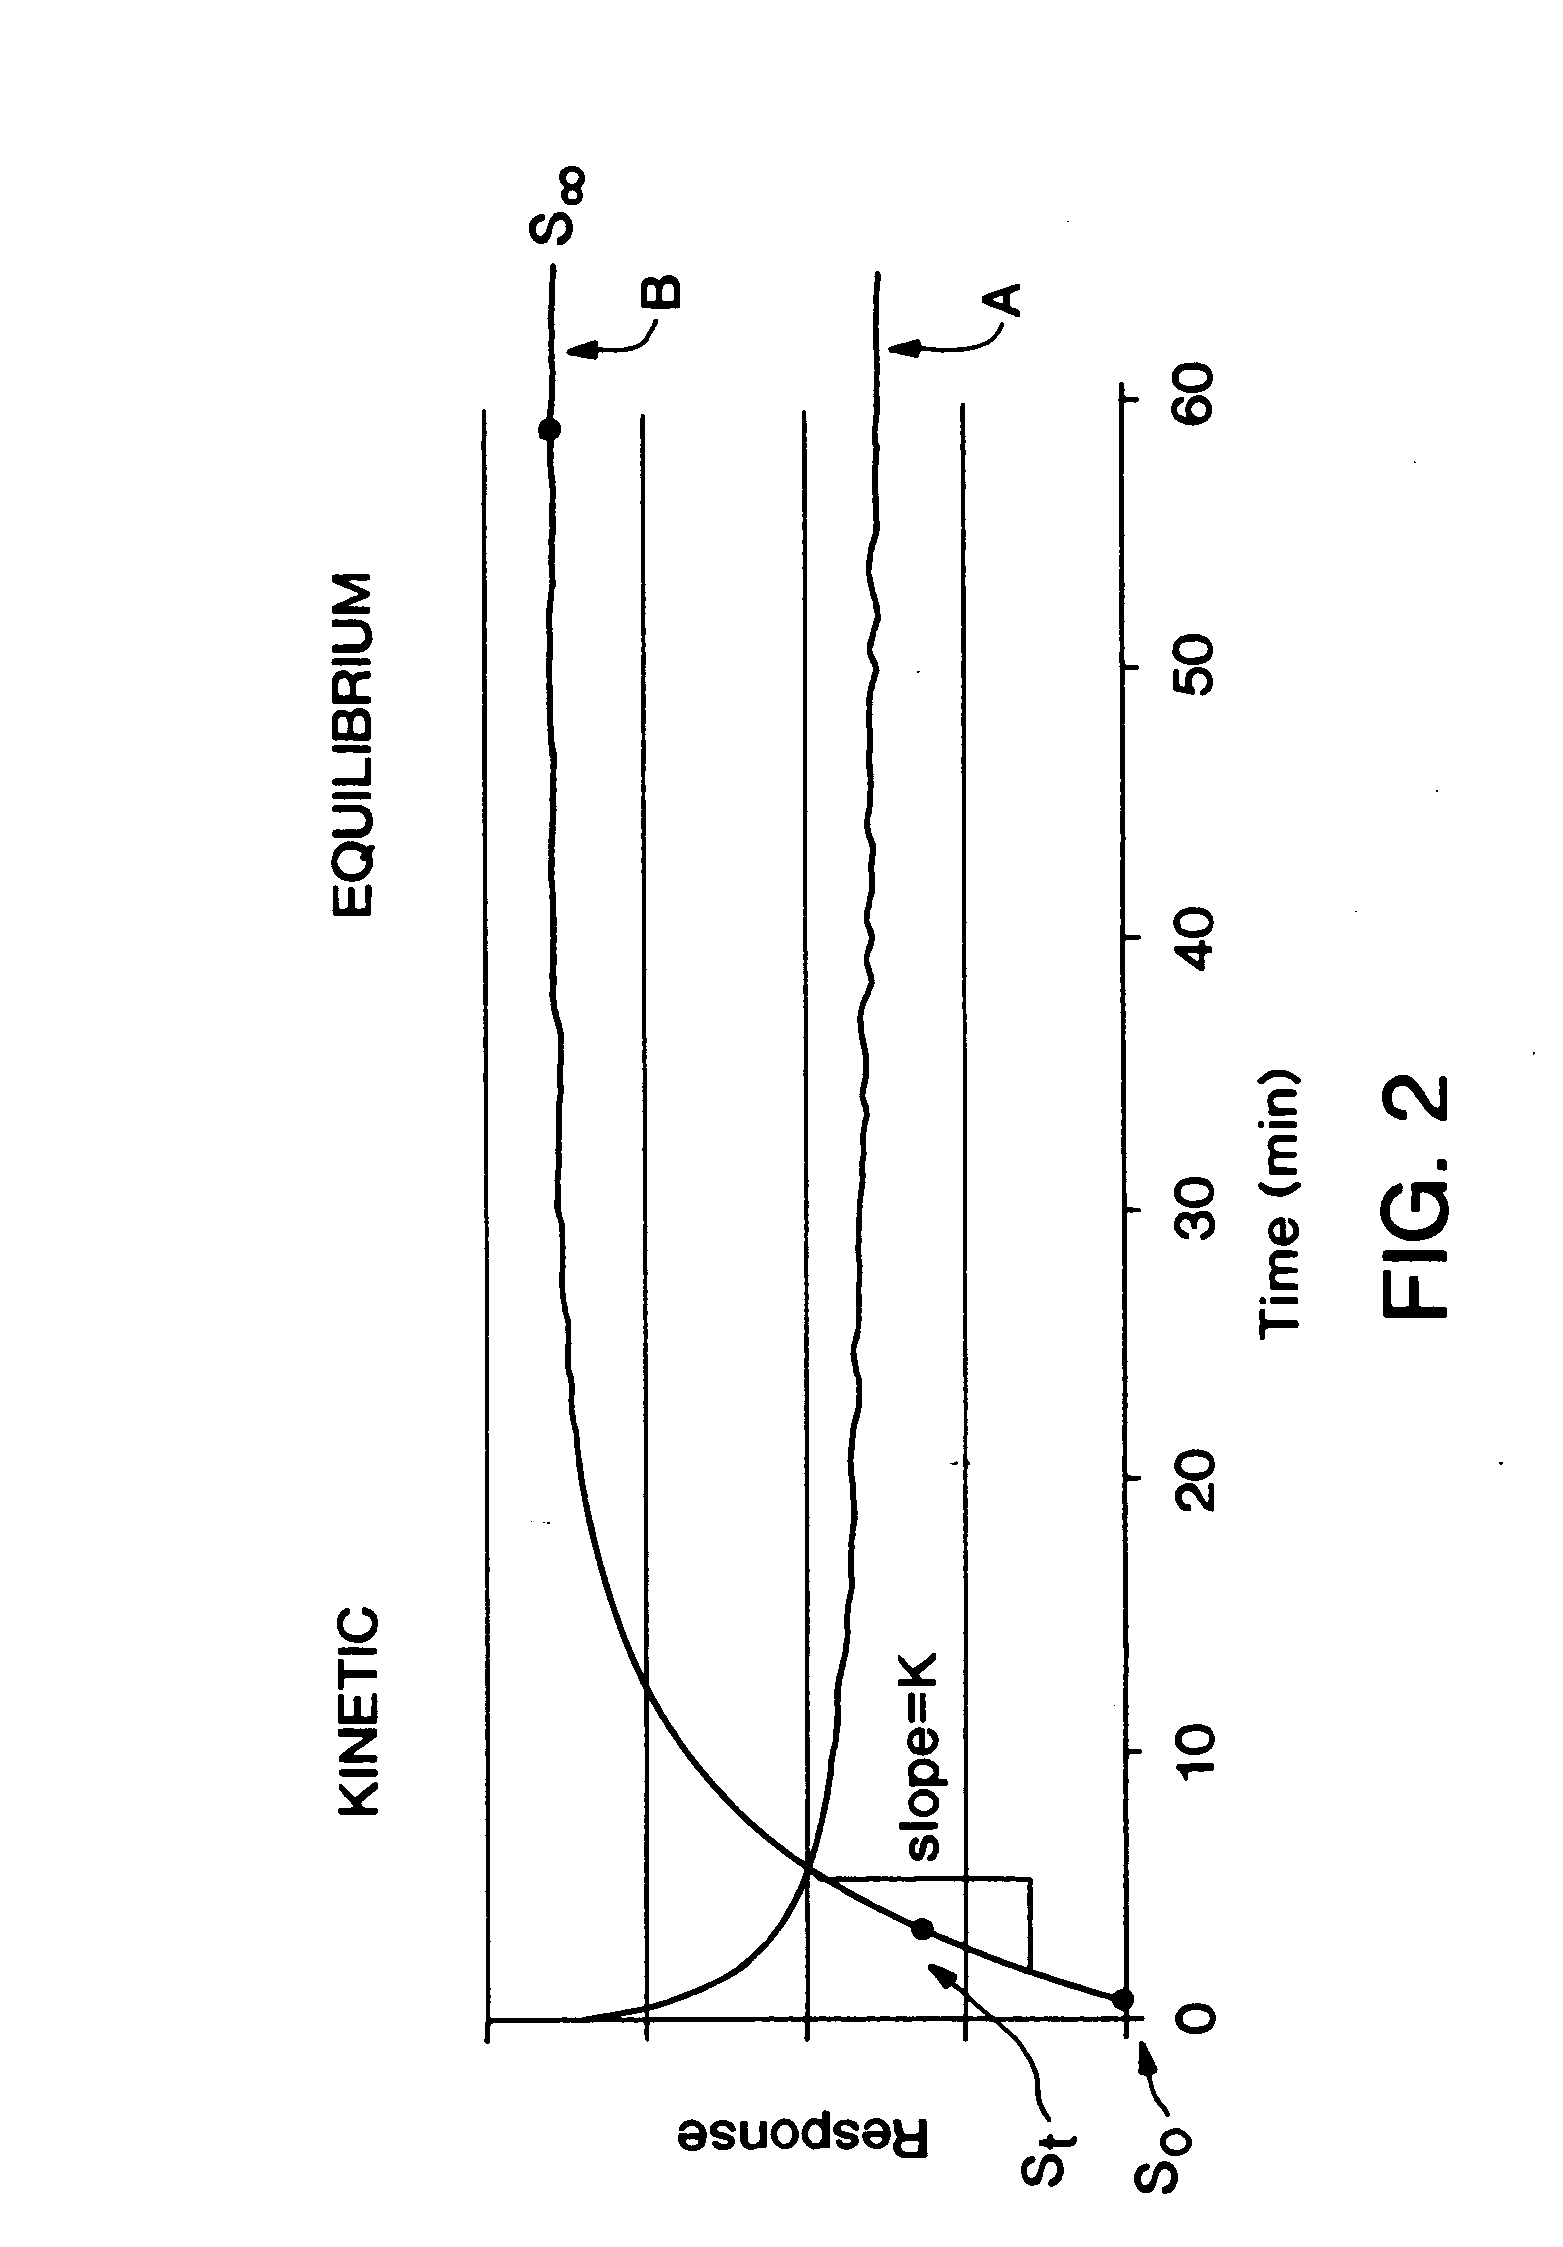 Methods for measuring analyte in a subject and/or compensating for incomplete reaction involving detection of the analyte